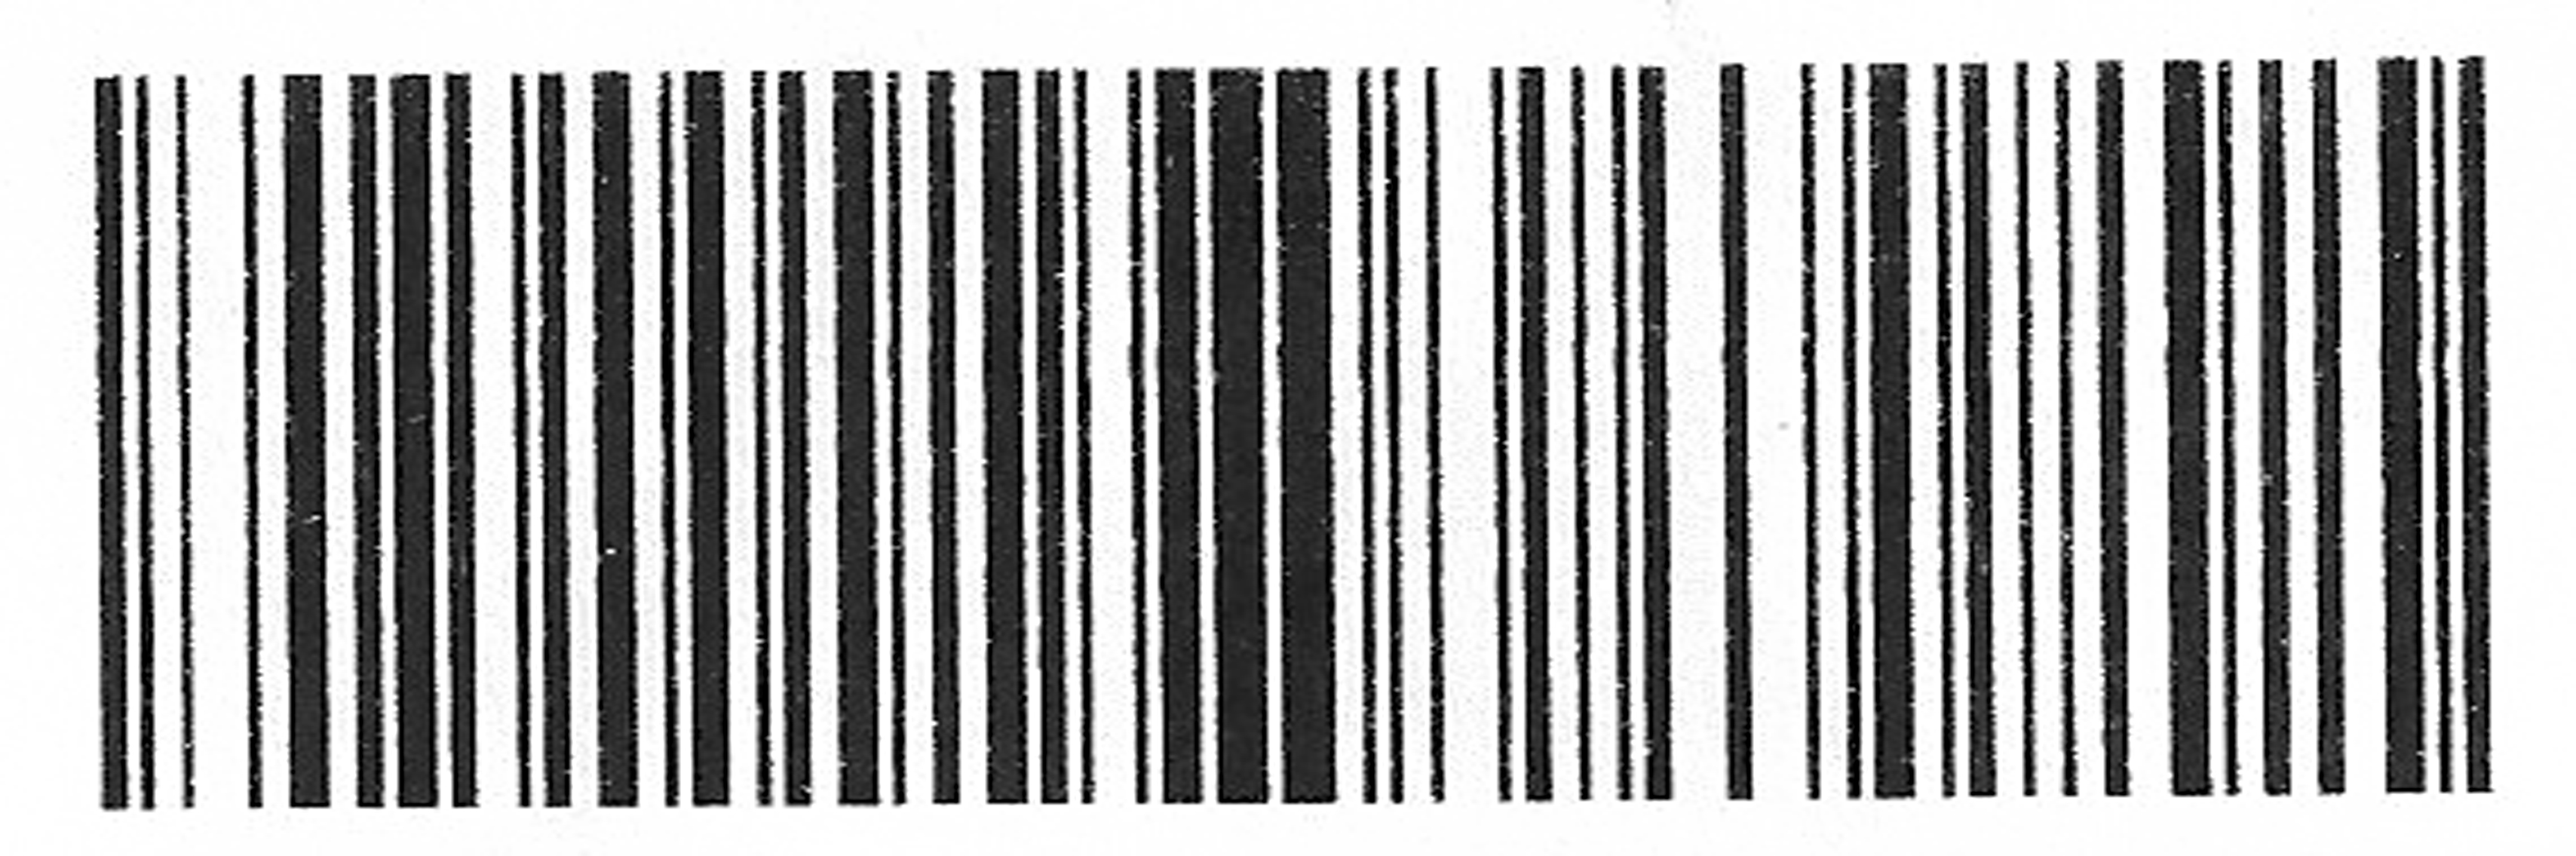 thing-kill-dish-how-to-set-up-a-barcode-system-employer-hostility-future